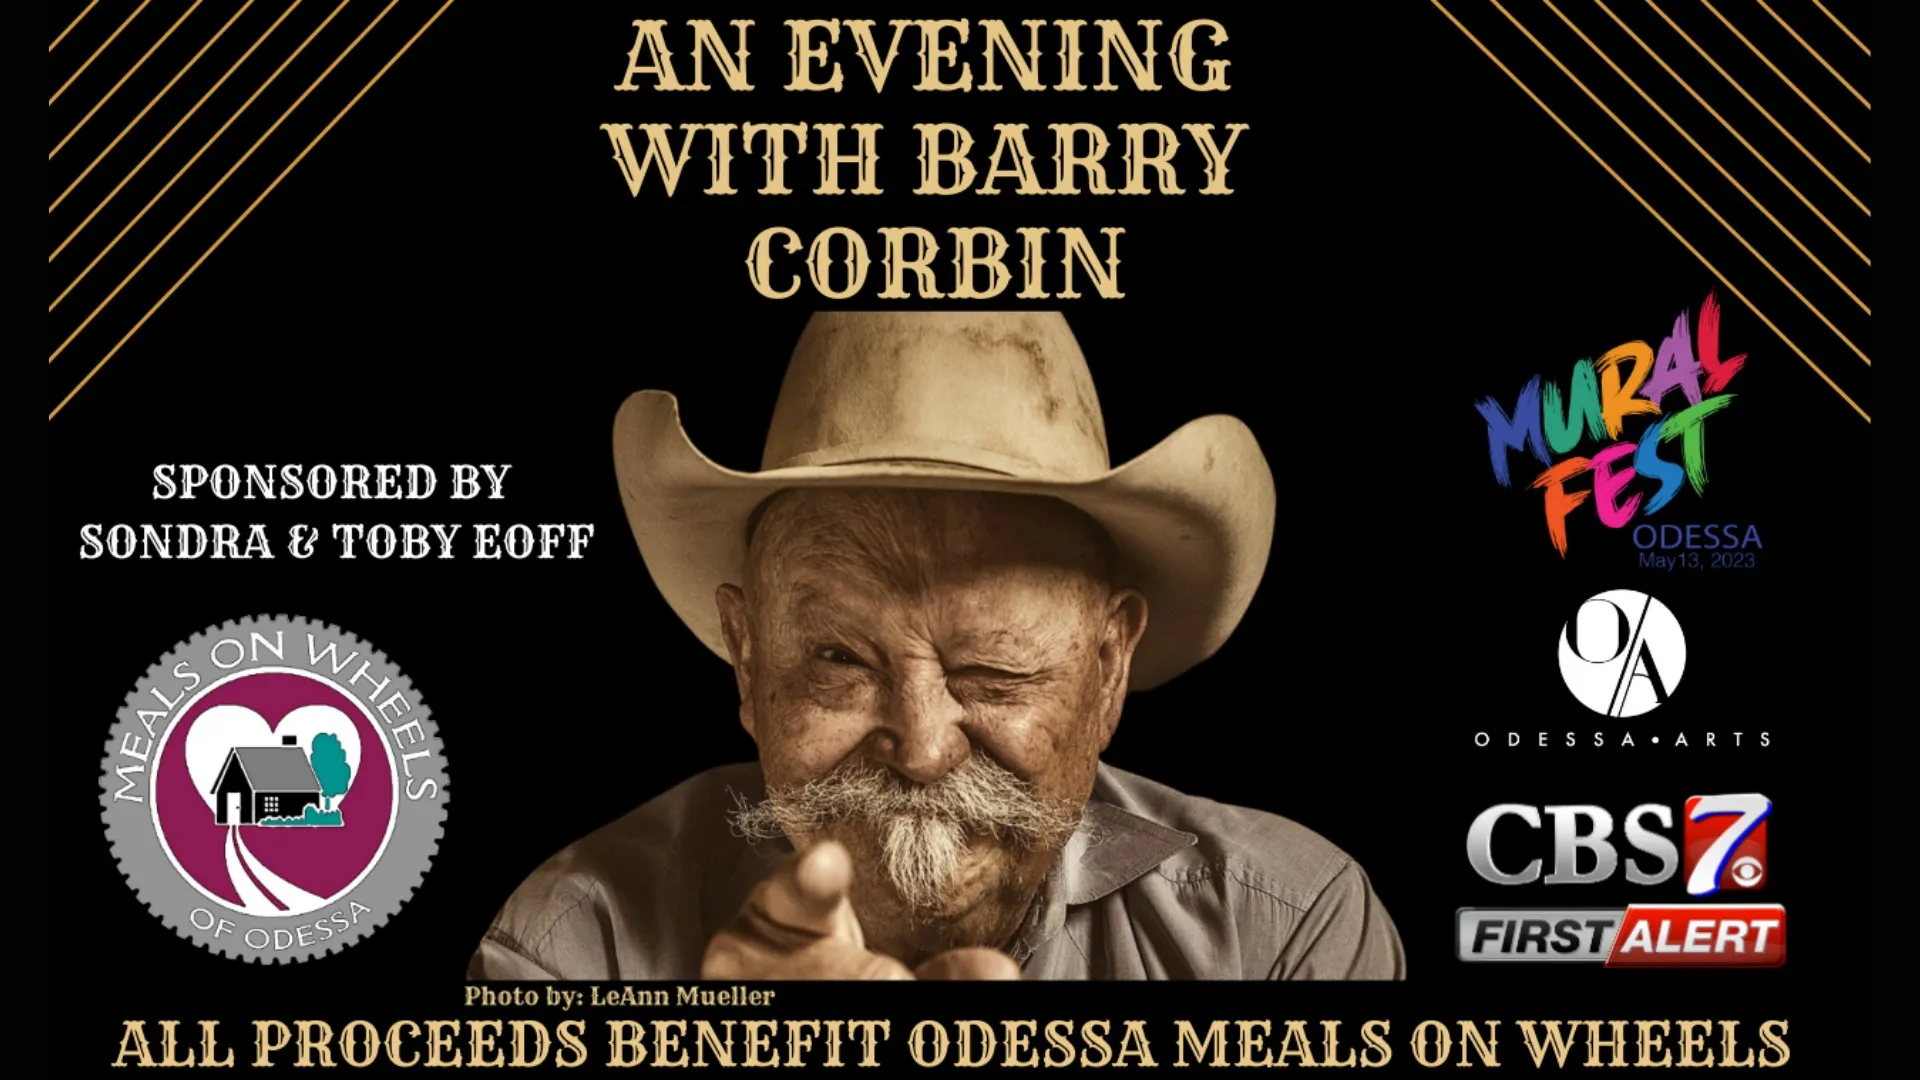 Event poster for An Evening with Barry Corbin benefitting Odessa Meals on Wheels include a photo of Barry wearing a cowboy hat, winking, and pointing at you.